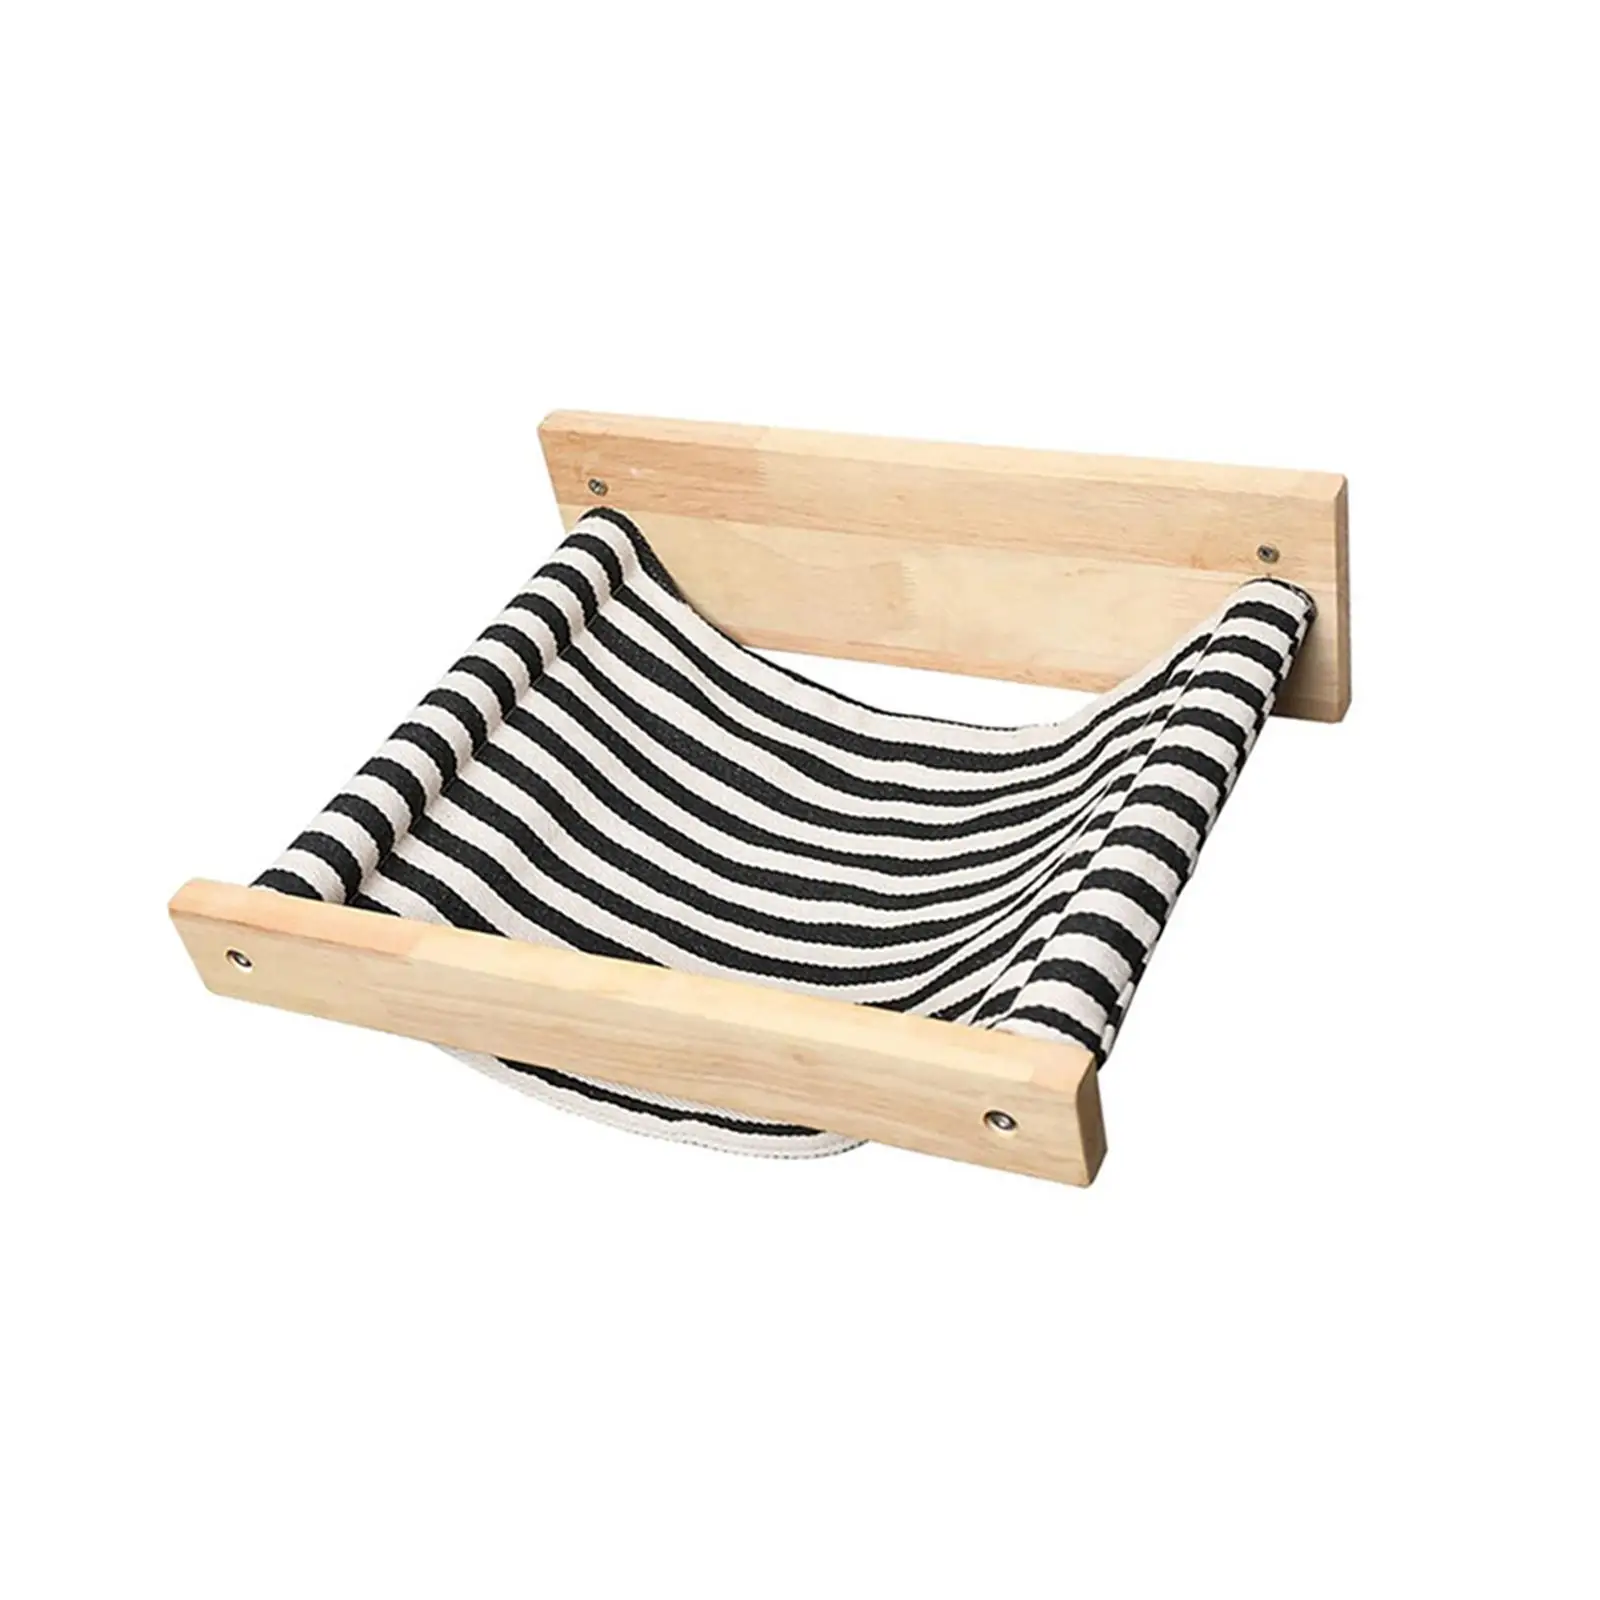 Cat Hammock Wall Mounted Resting Seat Soft for Indoor Cats Cat Perches Comfortable Playing Black Stripe Cat Shelves